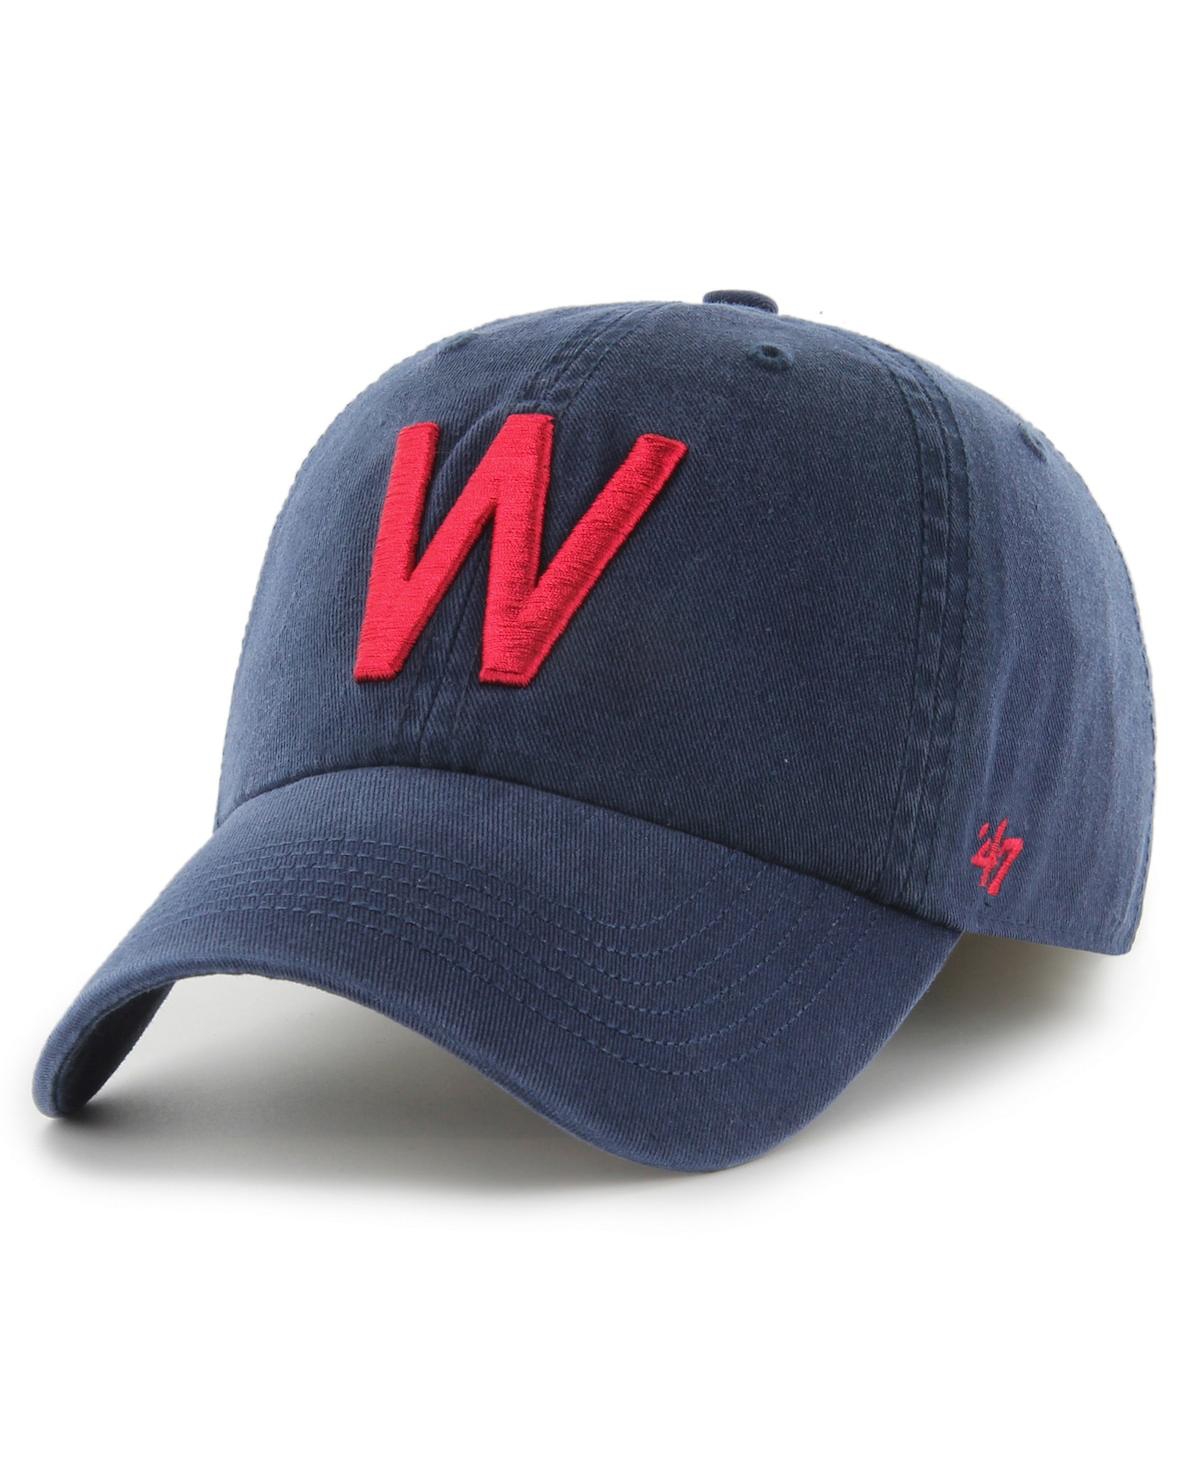 Men's '47 Brand Navy Washington Senators Cooperstown Collection Franchise Fitted Hat - Navy